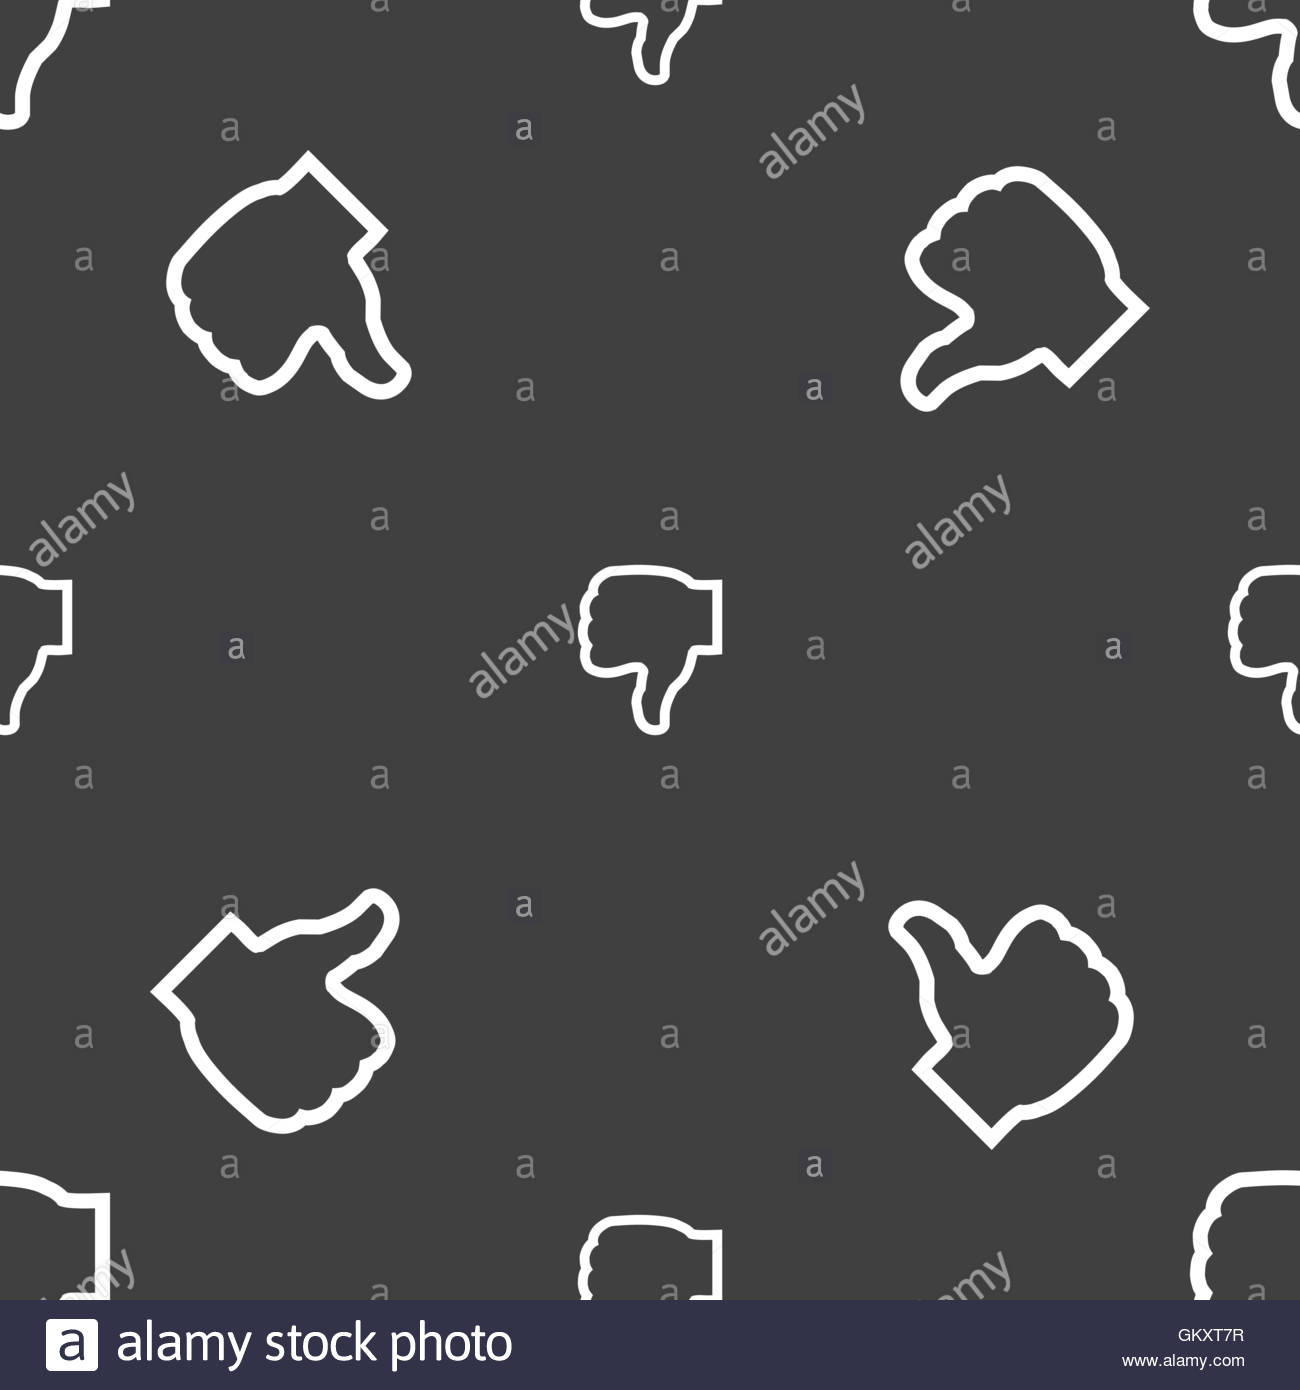 Dislike Icon Sign Seamless Pattern On A Gray Background Vector